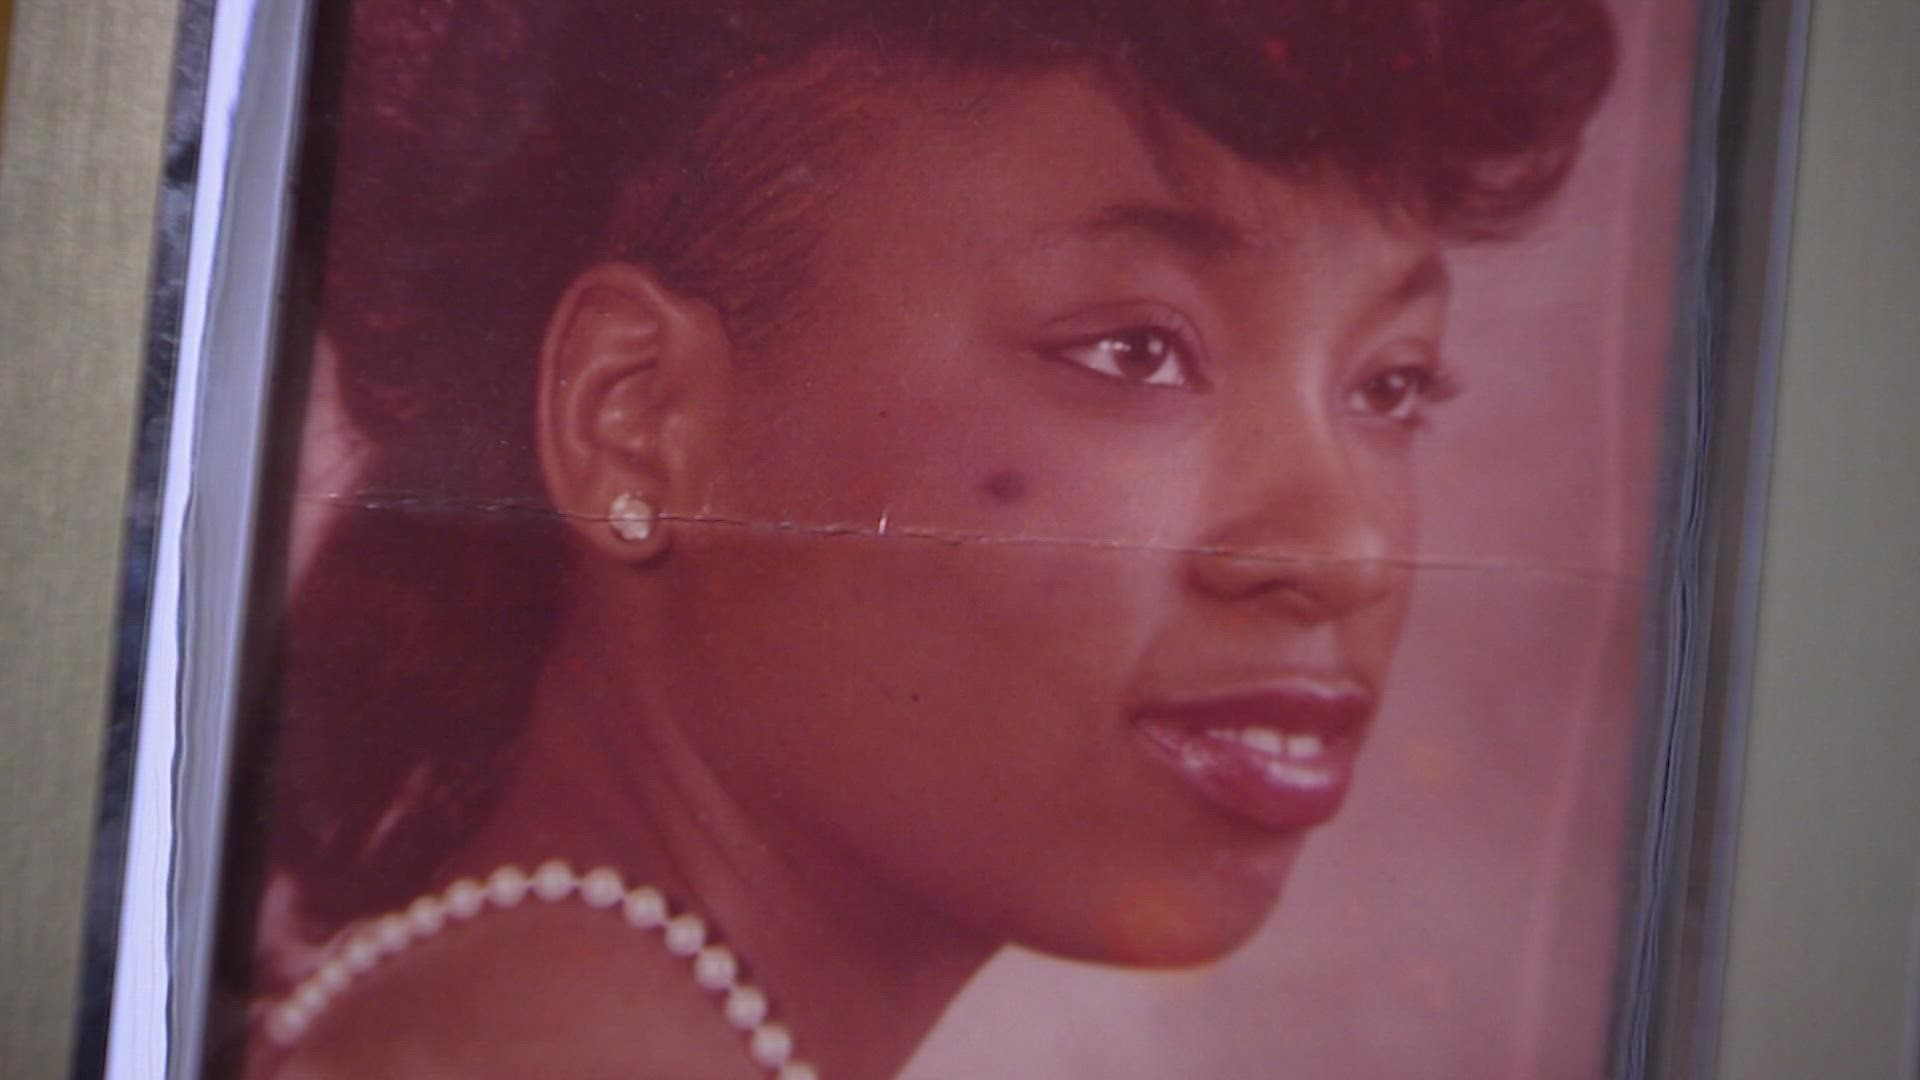 An ambitious TSU law student was mysteriously murdered then buried on Houston's outskirts. New findings in this 1993 cold case could help catch the killer.